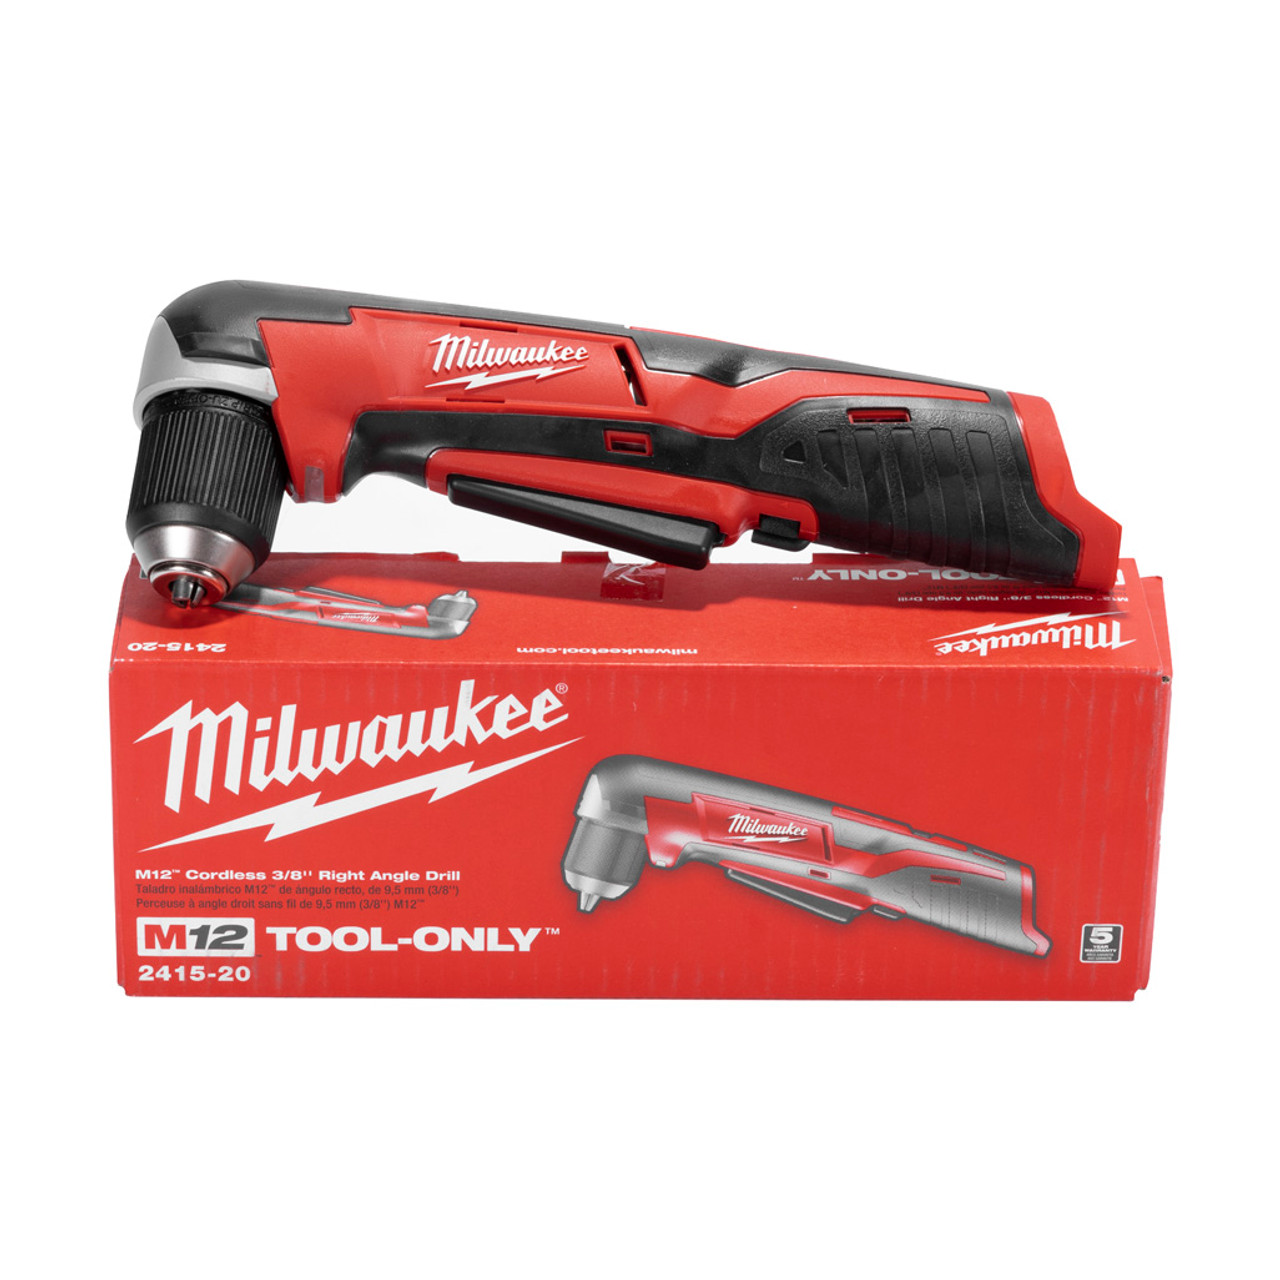 Milwaukee M12 Right Angle Drill Driver 3/8-Inch 800 Rpm Cordless (2415-20)  JB Tools